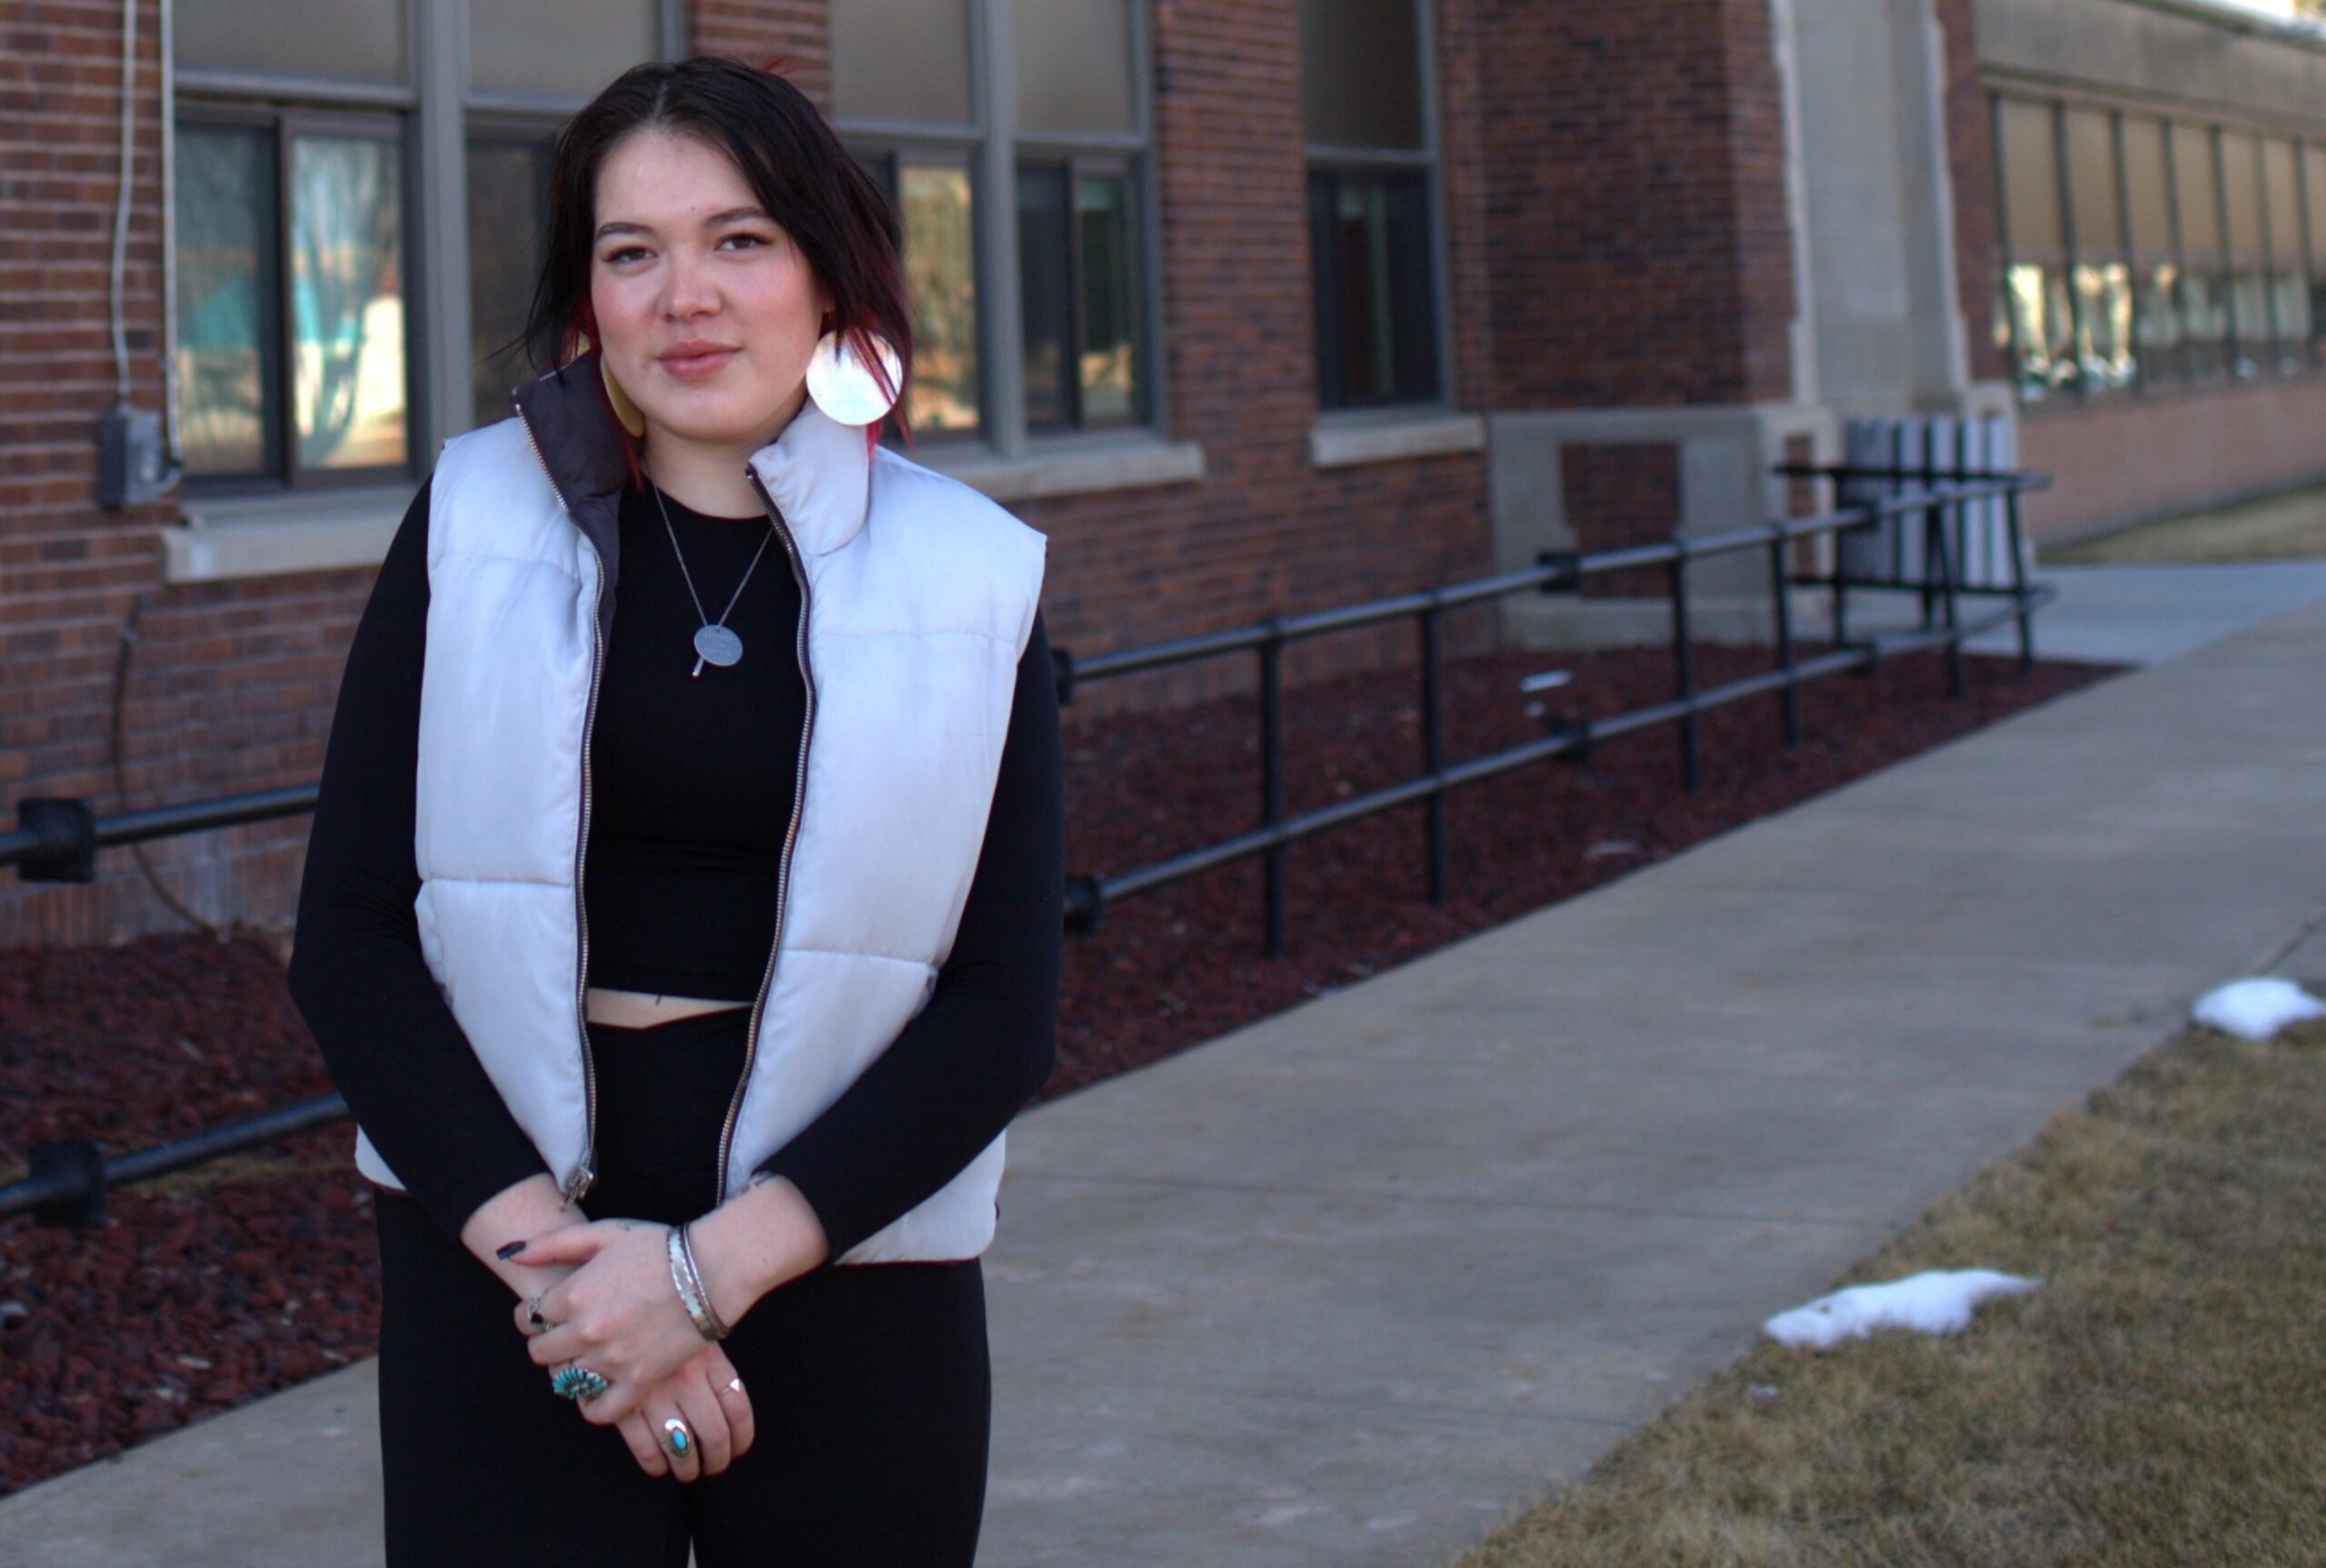 Denied a normal childhood, Nebraska's youth poet laureate now aims to inspire Native kids like her to dream - Flatwater Free Press